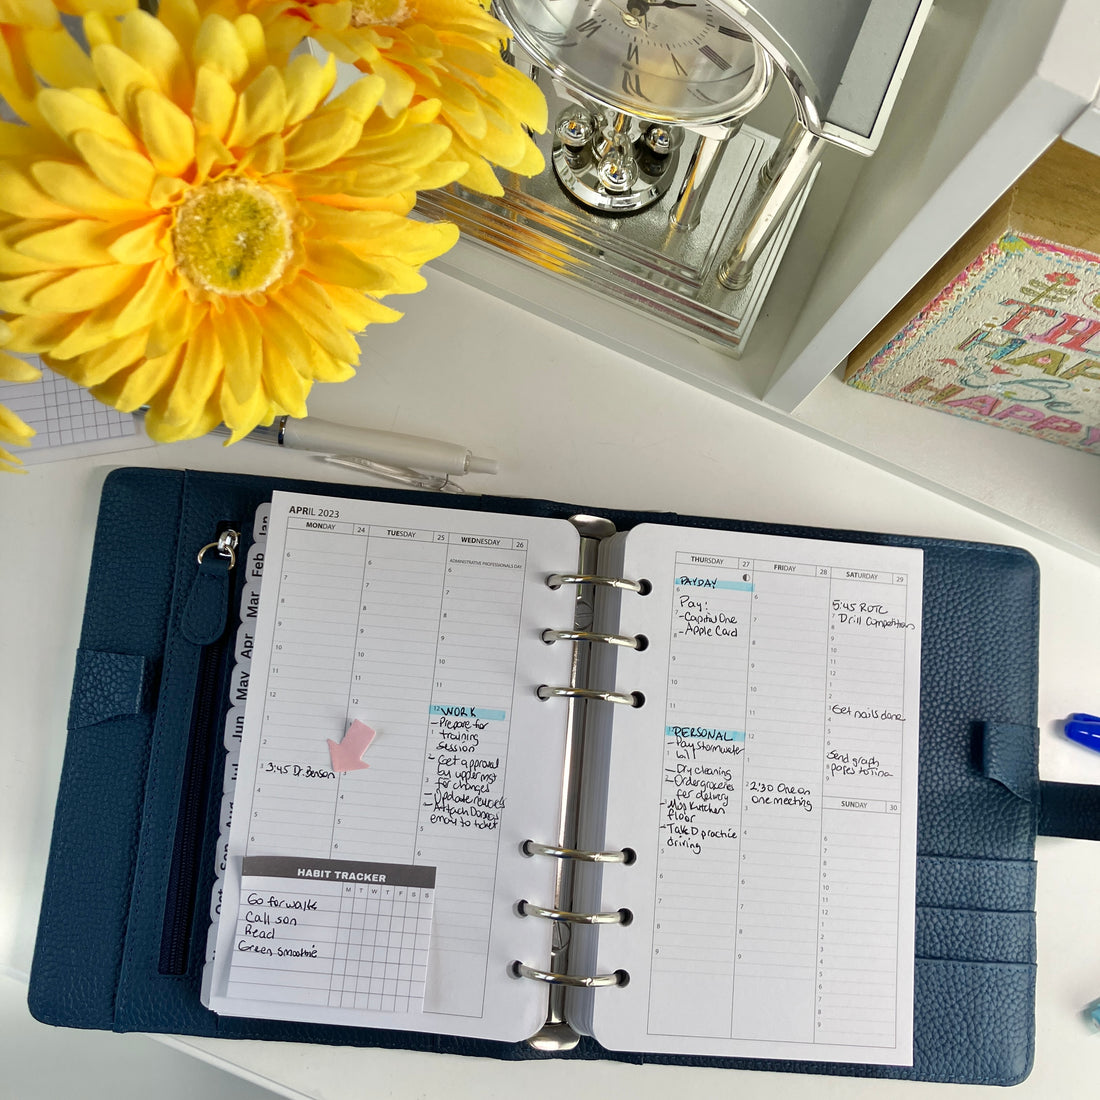 Why should I write down my routine in my planner?